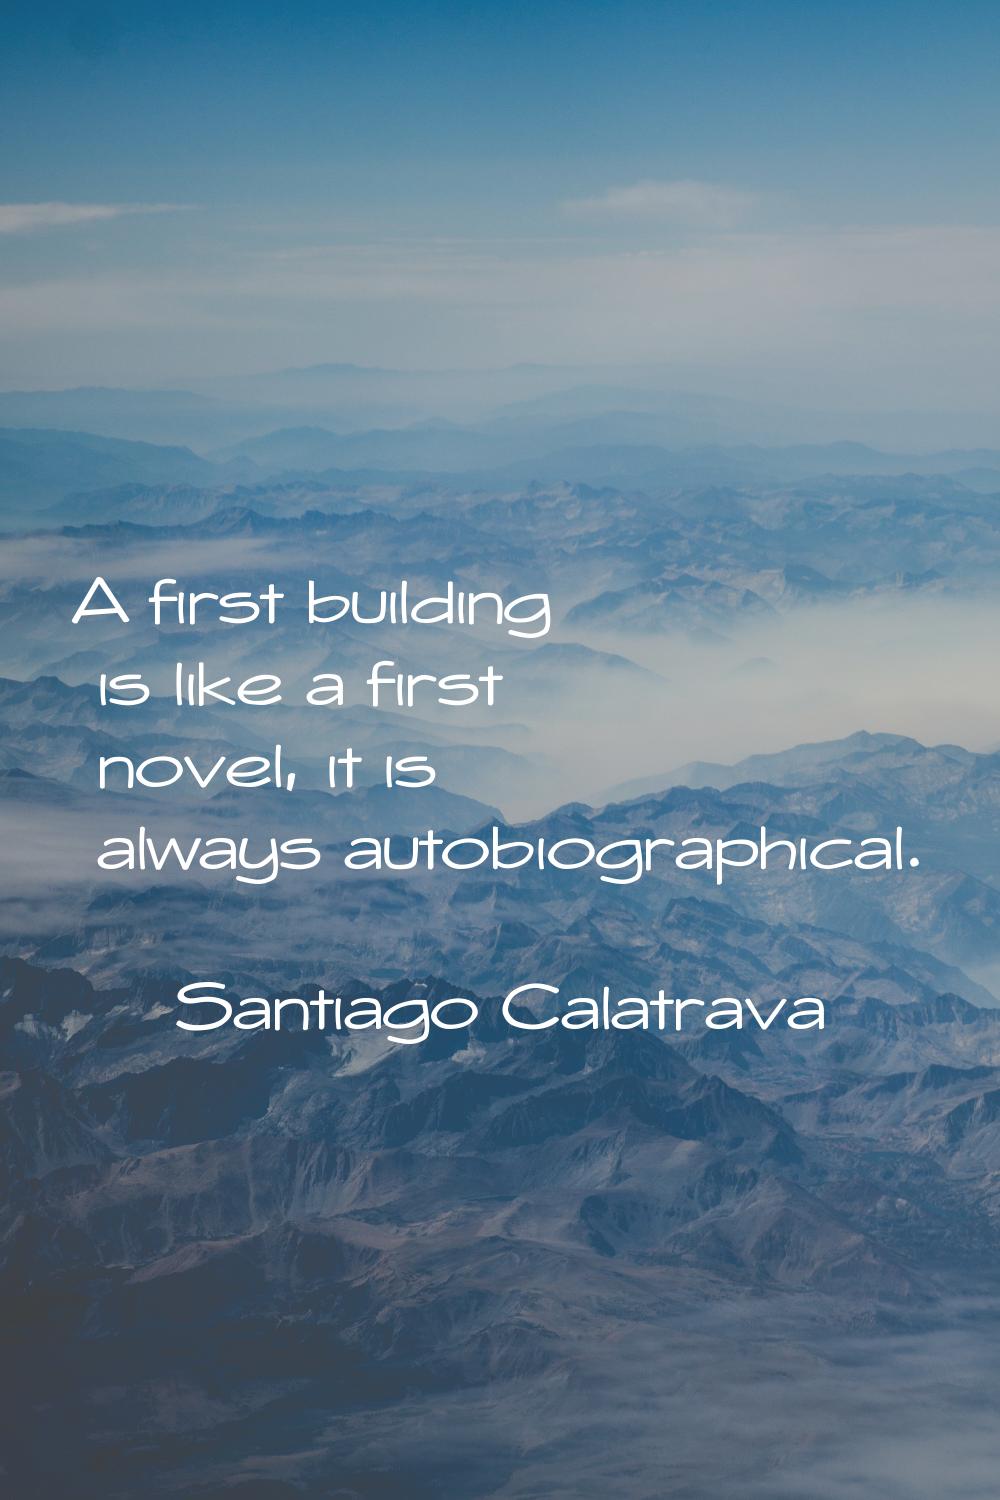 A first building is like a first novel, it is always autobiographical.